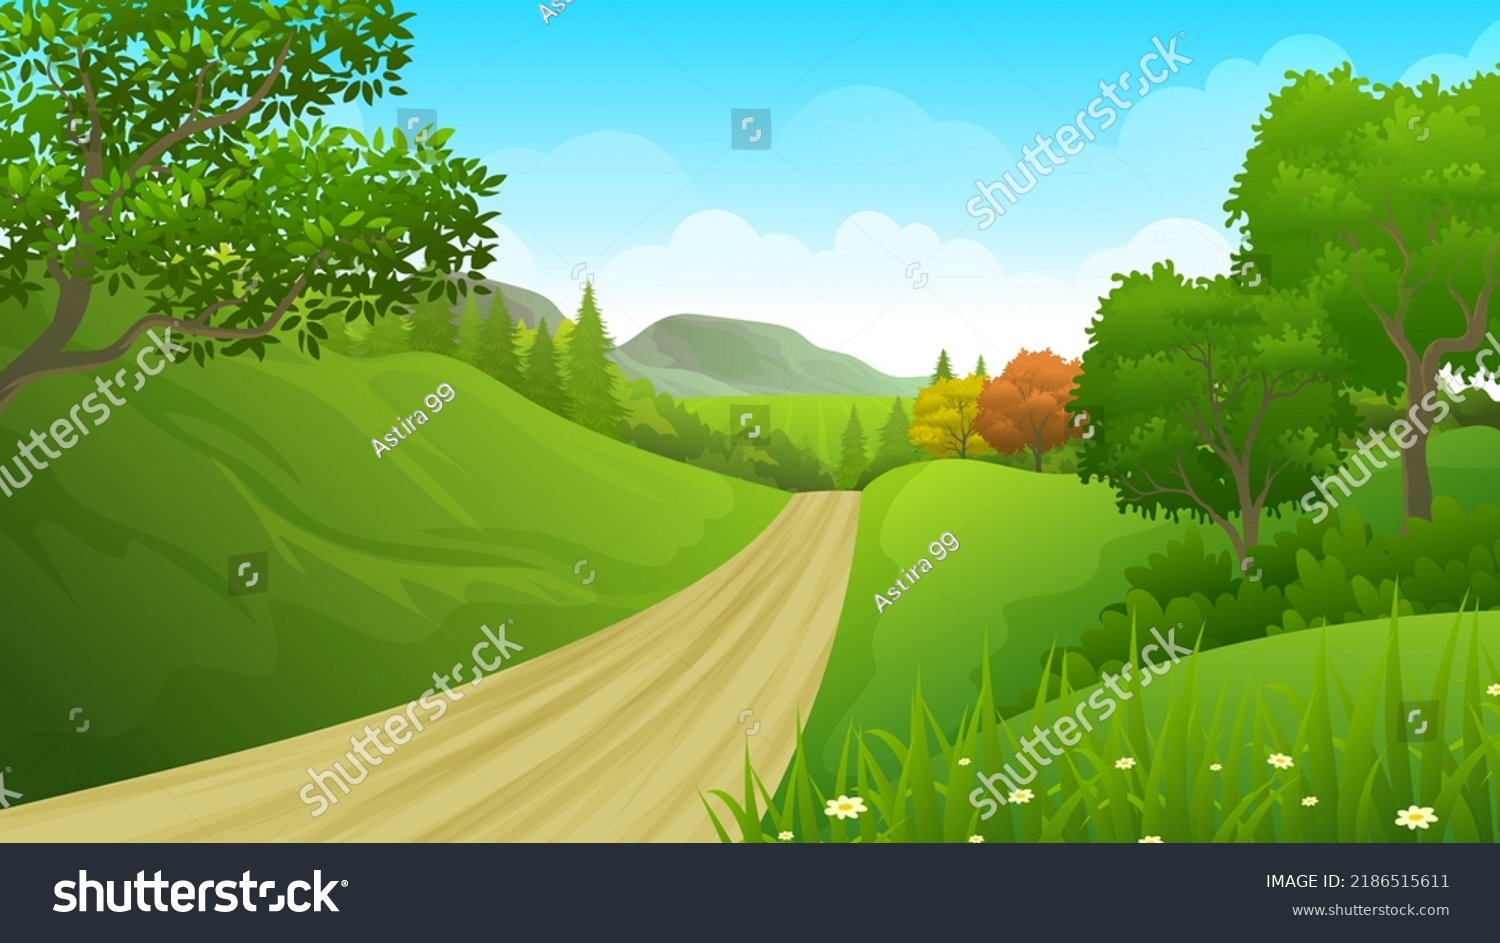 10 Road In Between Mountain Trees AND Clouds Background Vector Images ...